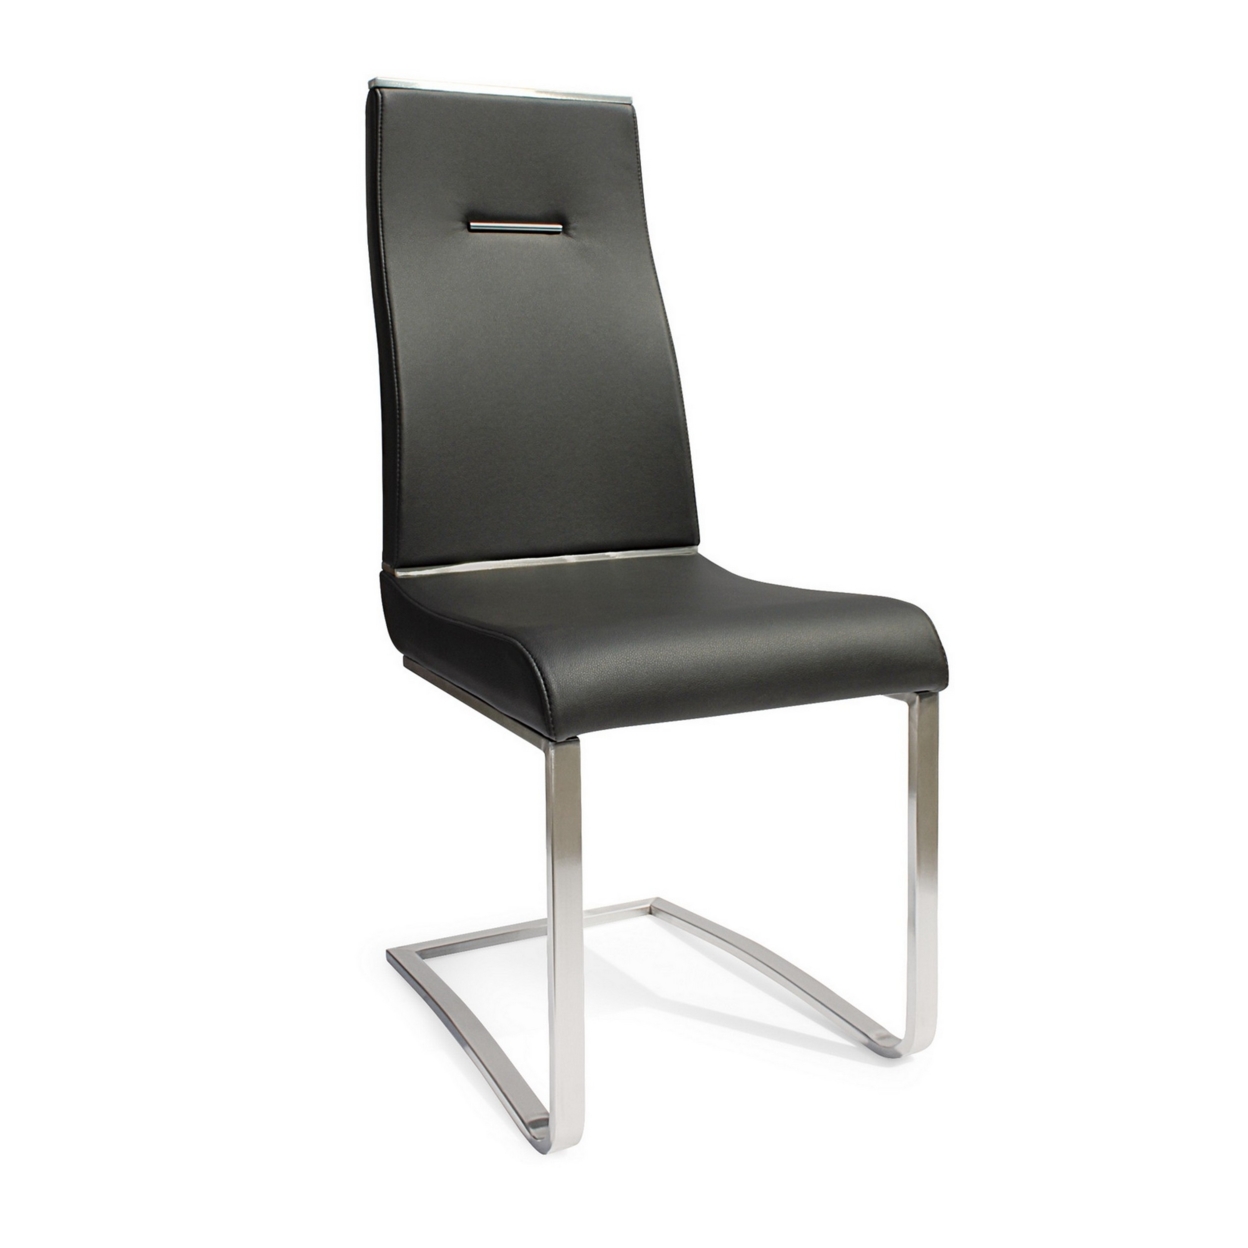 Sira 17 Inch Contemporary Dining Chair With Steel Base, Black Faux Leather- Saltoro Sherpi